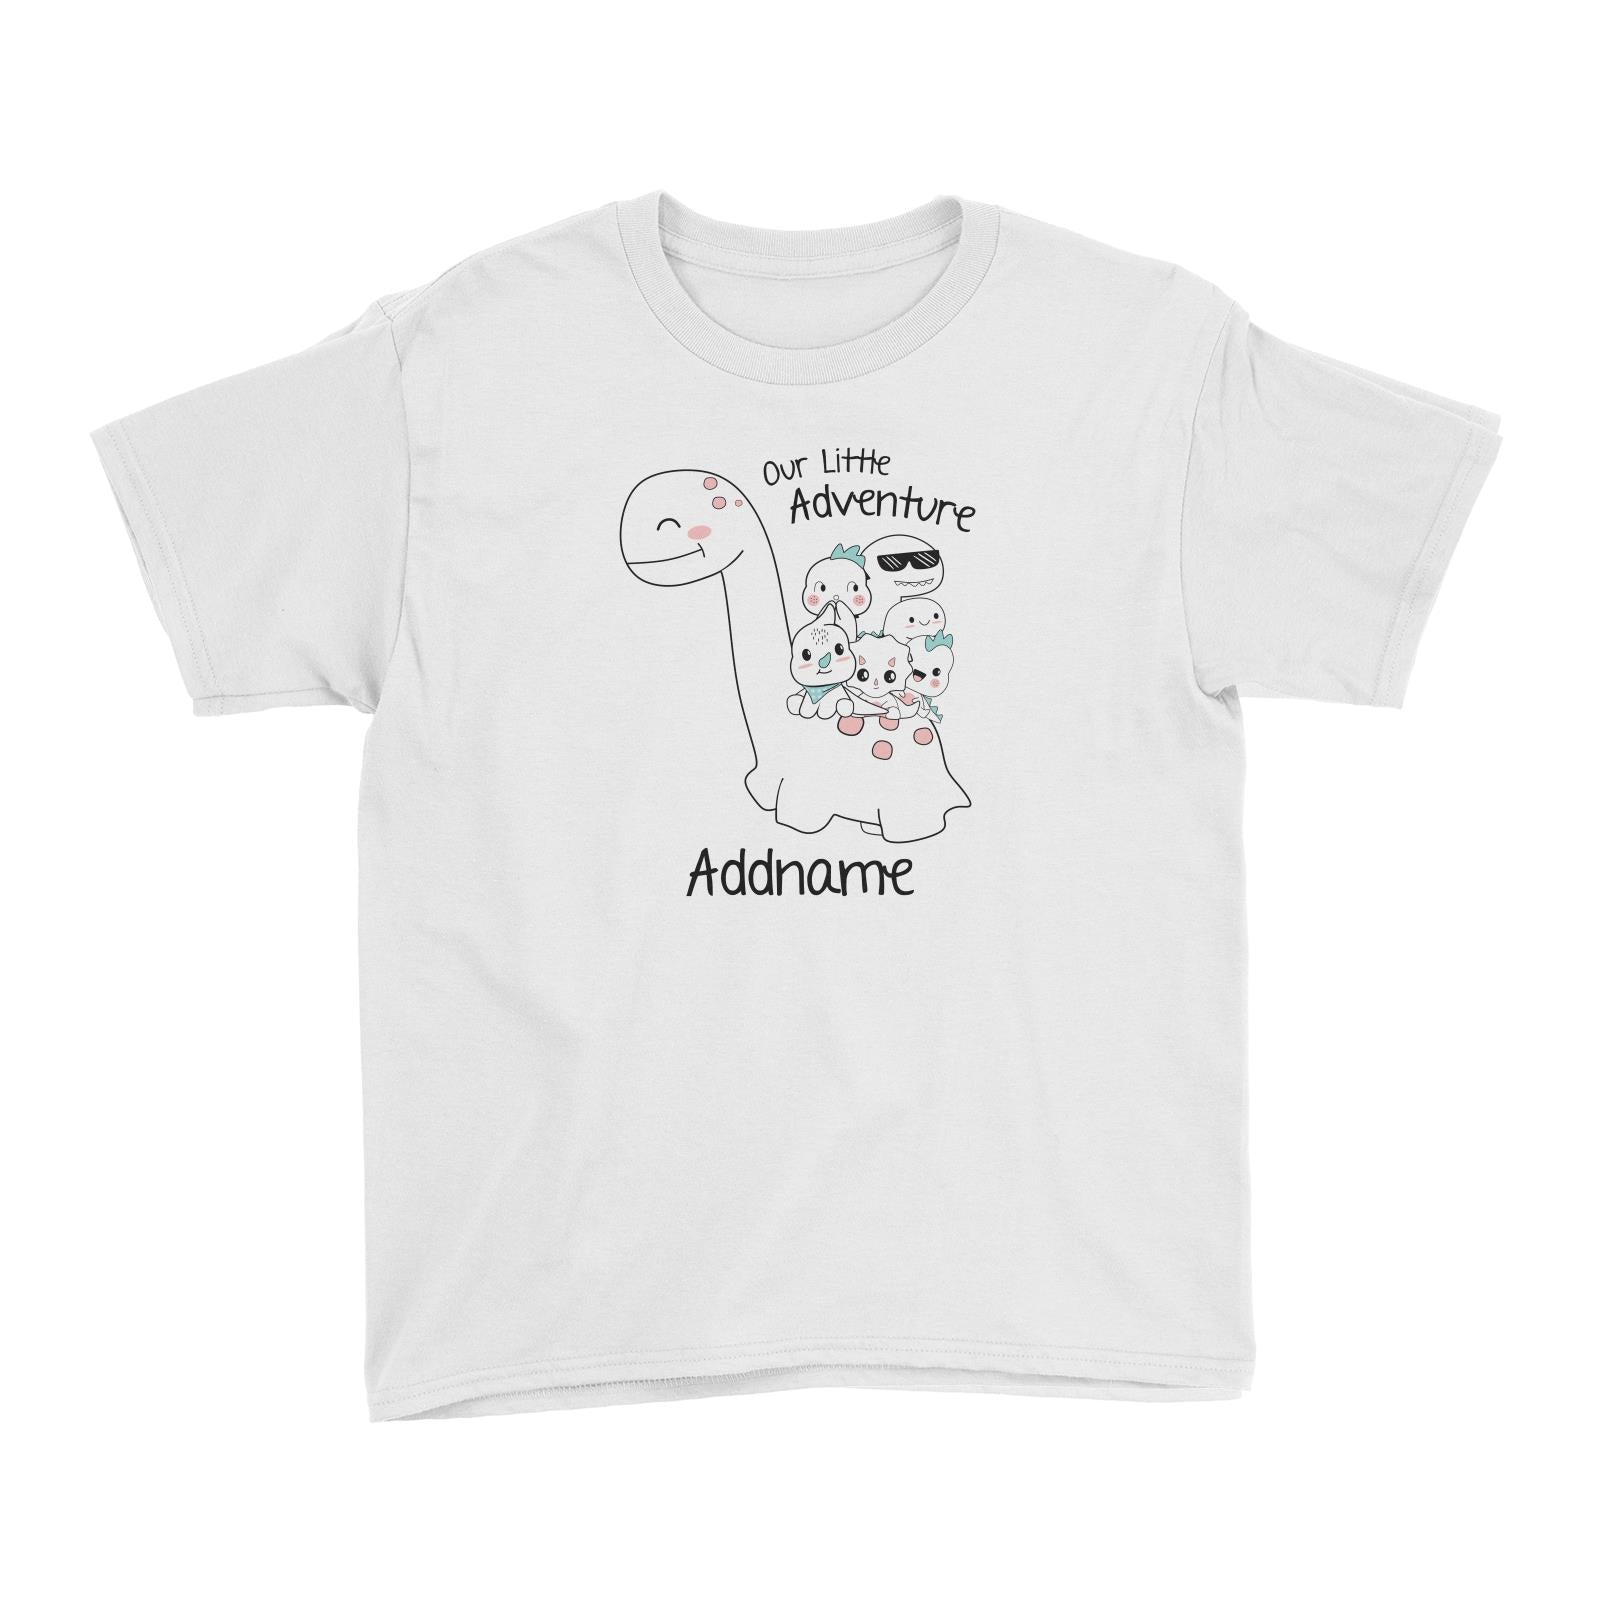 Cute Animals And Friends Series Cute Little Dinosaur Our Little Adventure Addname Kid's T-Shirt